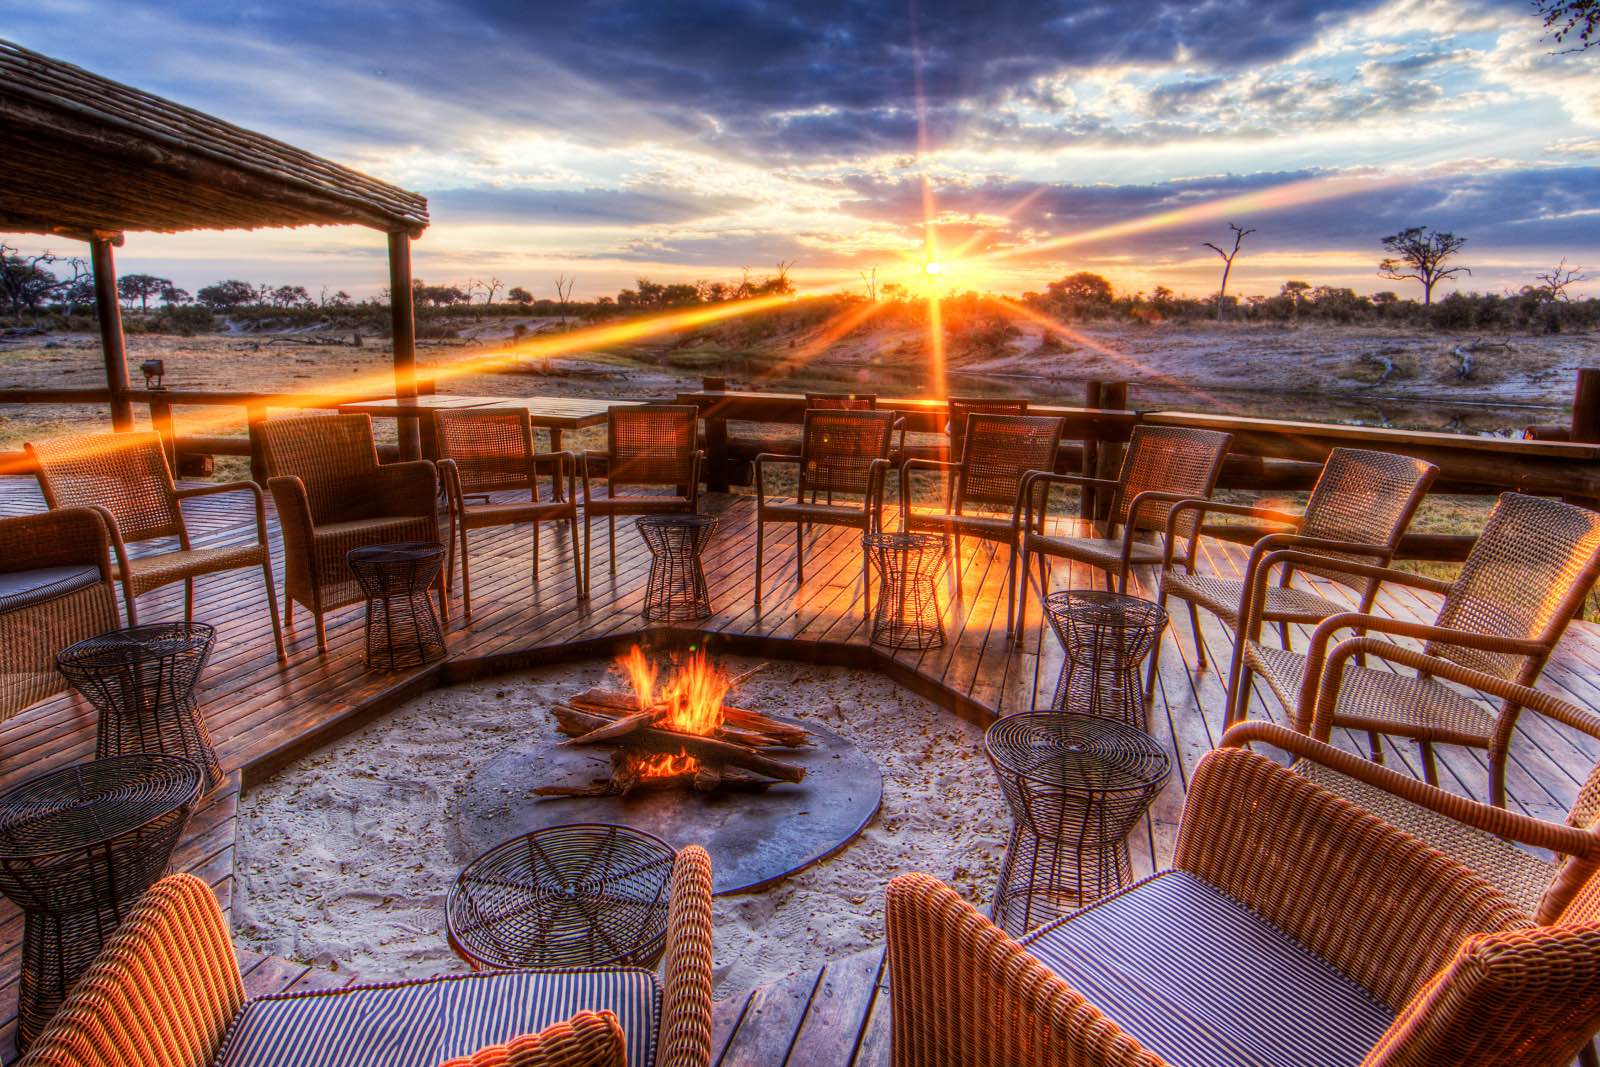 Sunset as seen from the open-air boma at Savute Safari Lodge